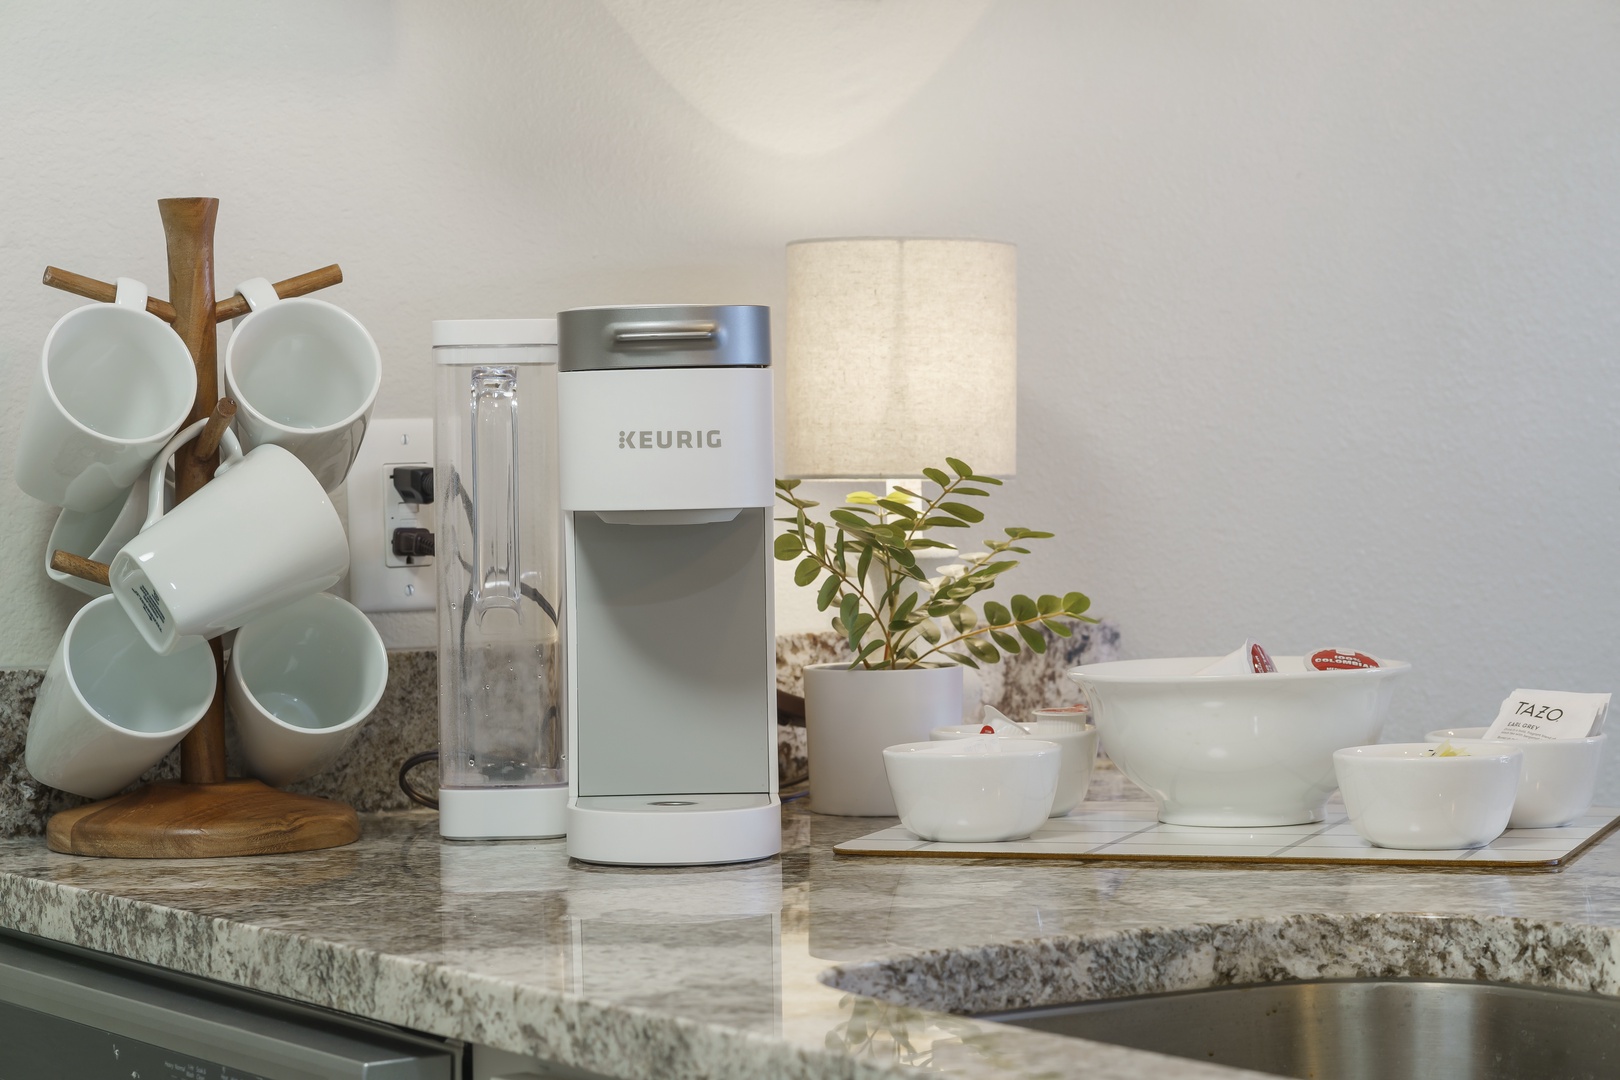 Wake up and have some fresh coffee with the Keurig